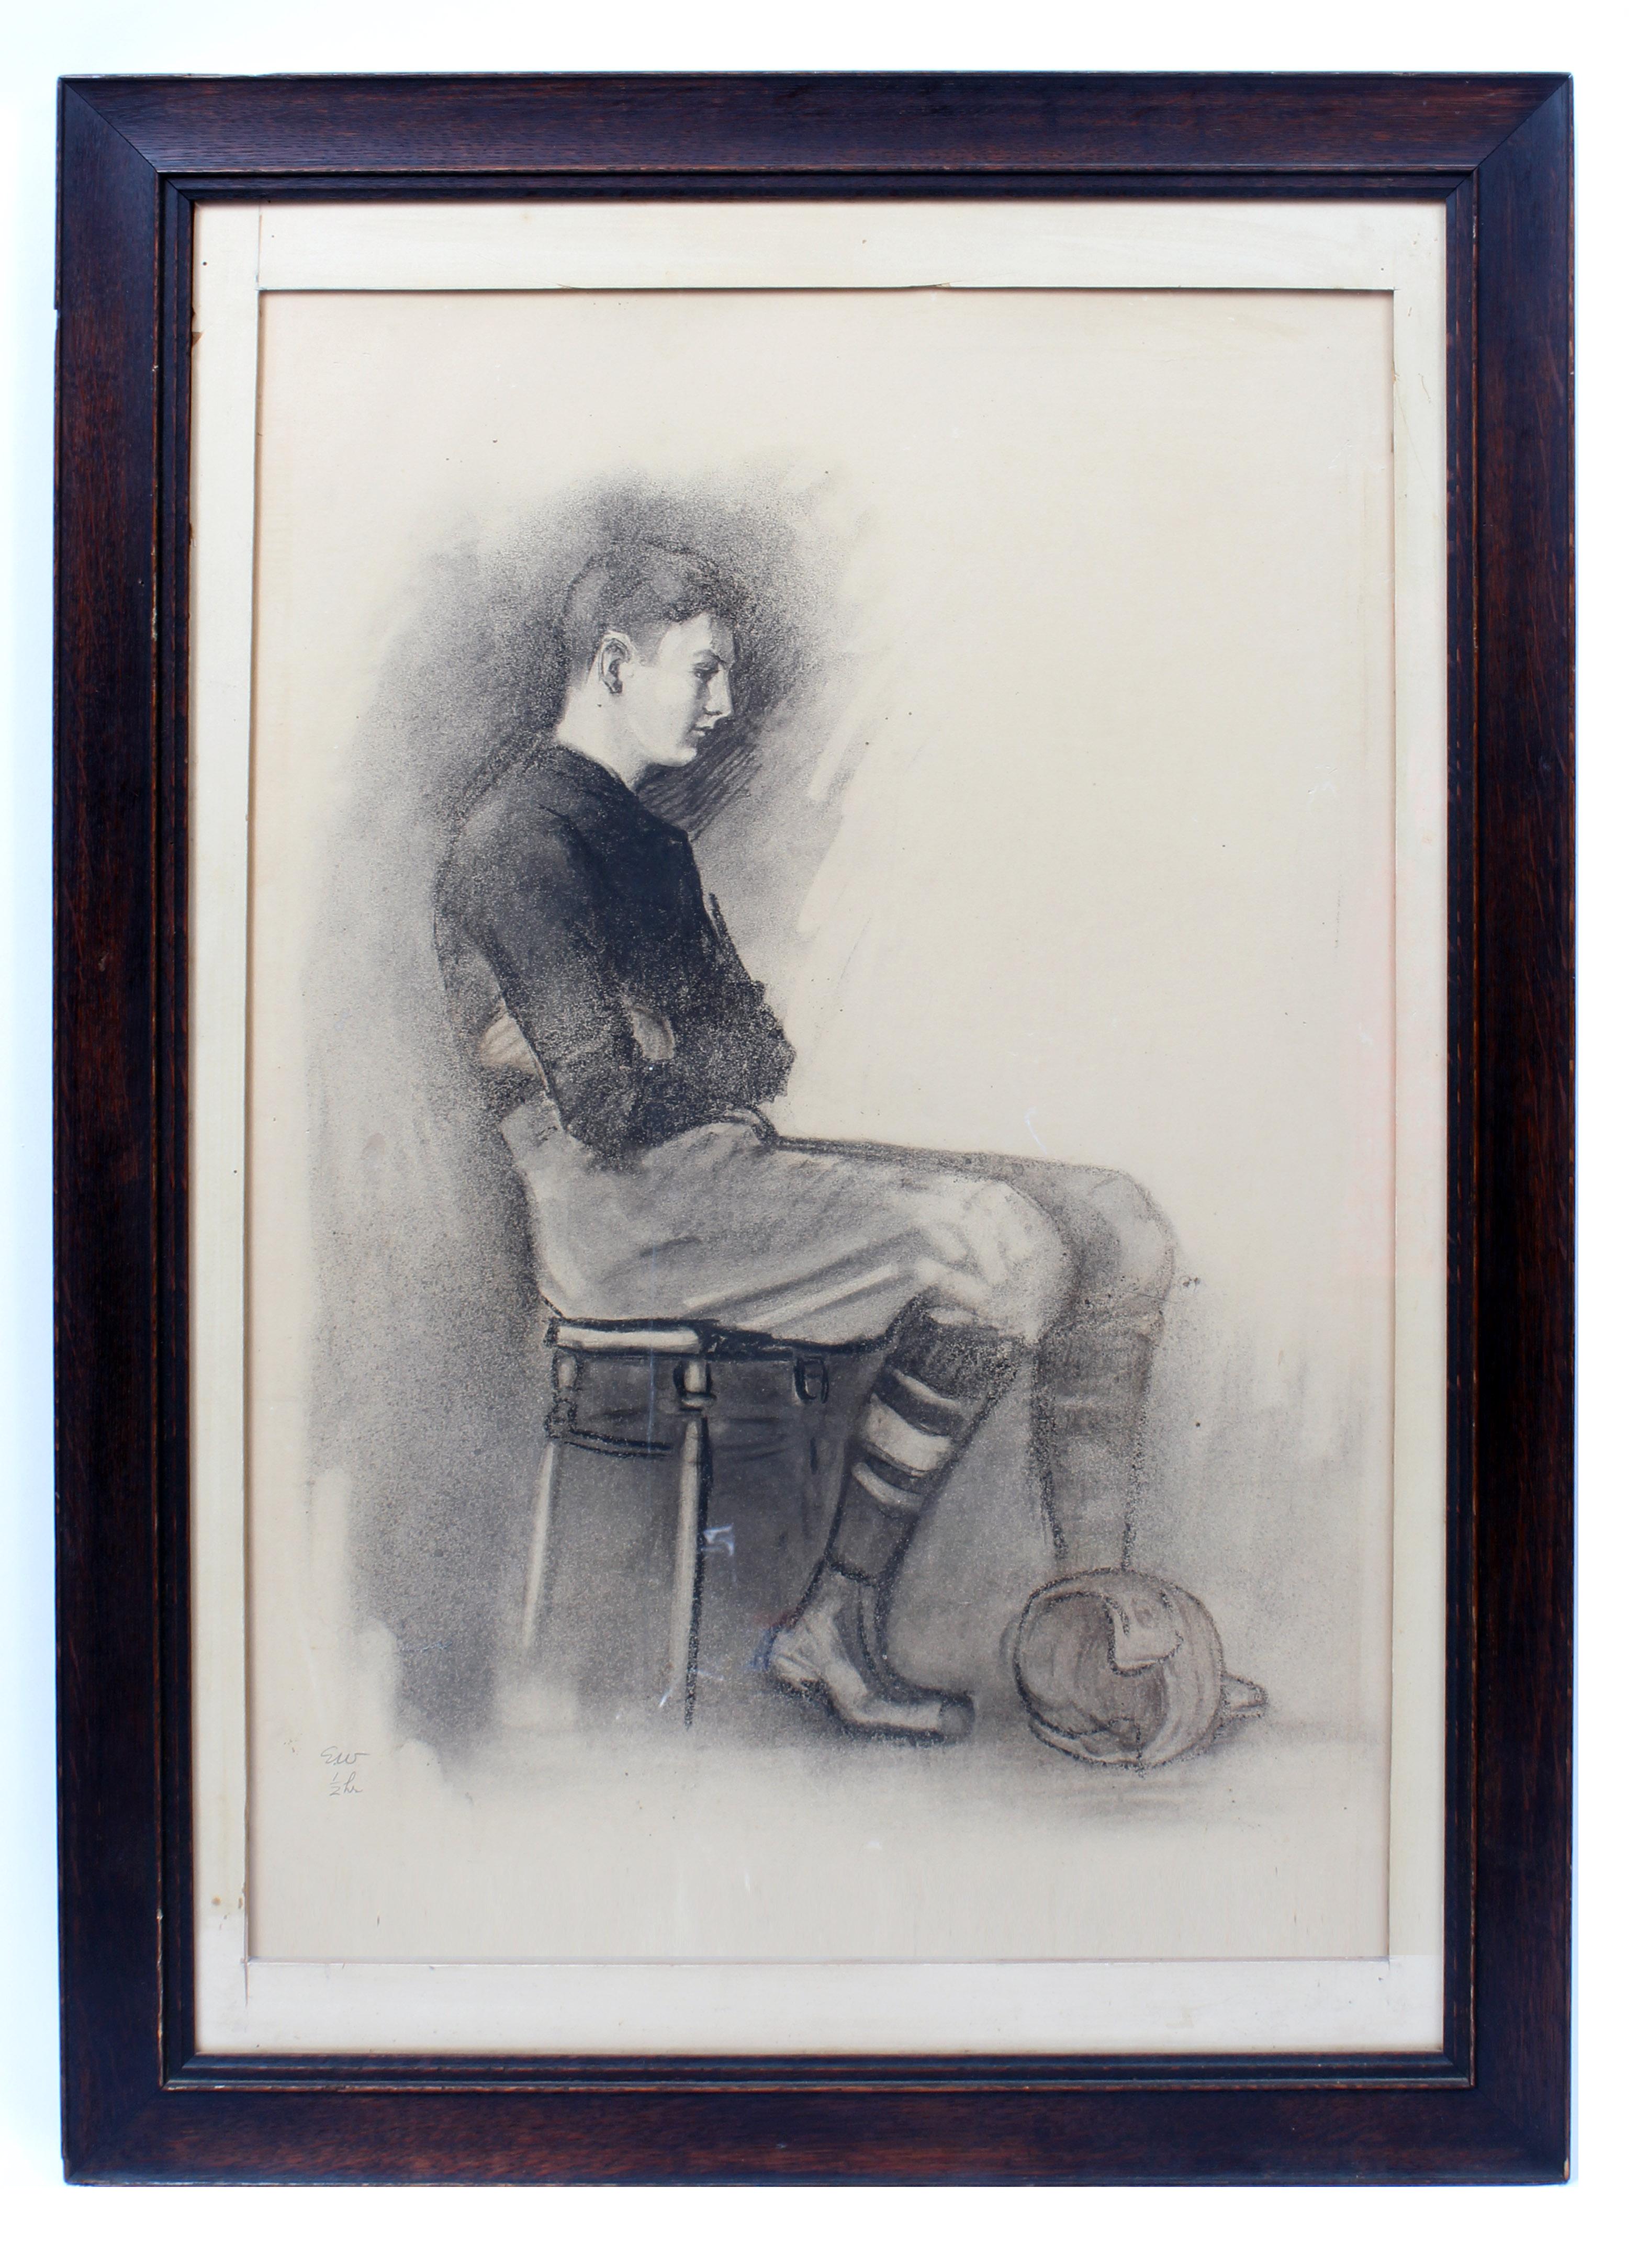 Unknown Figurative Art - Antique American Drawing Football Player Monogrammed Original Frame early 20th C